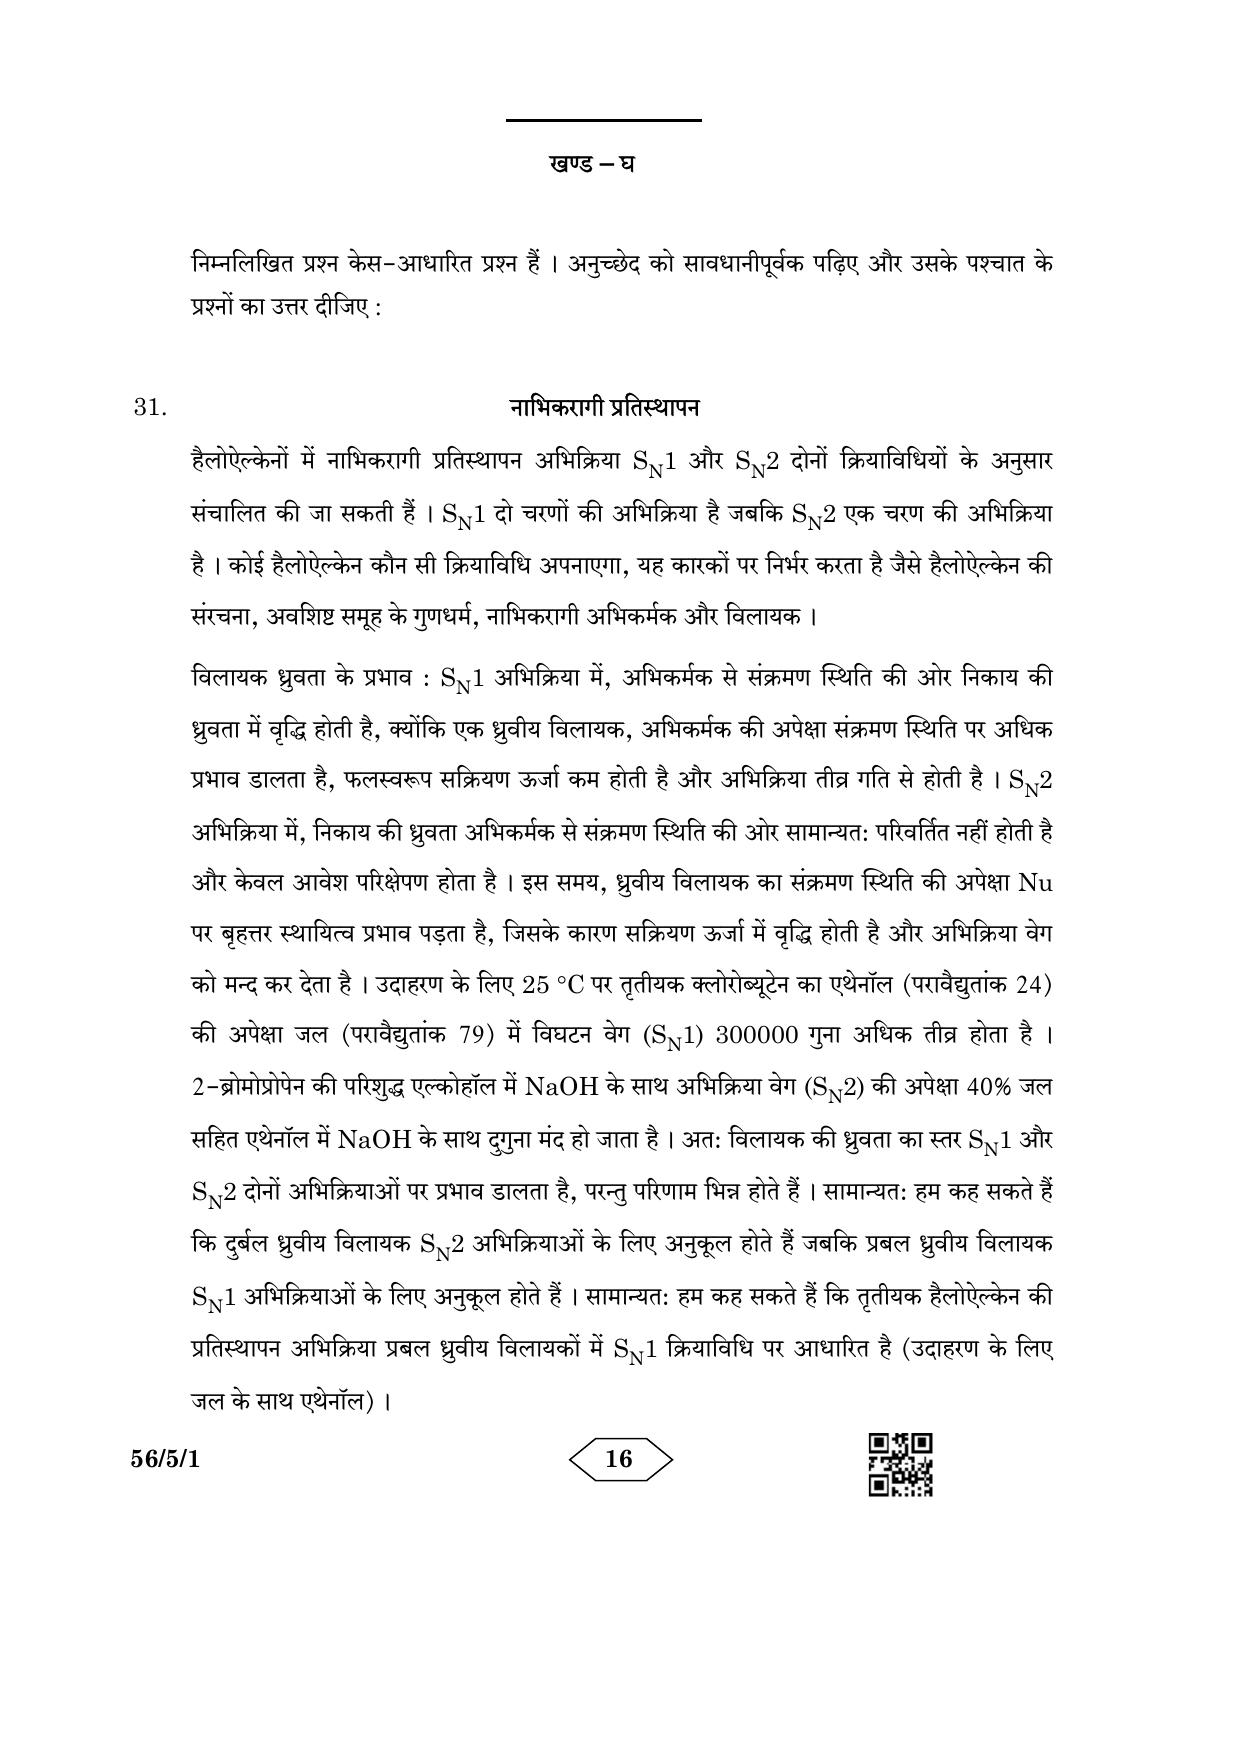 CBSE Class 12 56-5-1 Chemistry 2023 Question Paper - Page 16